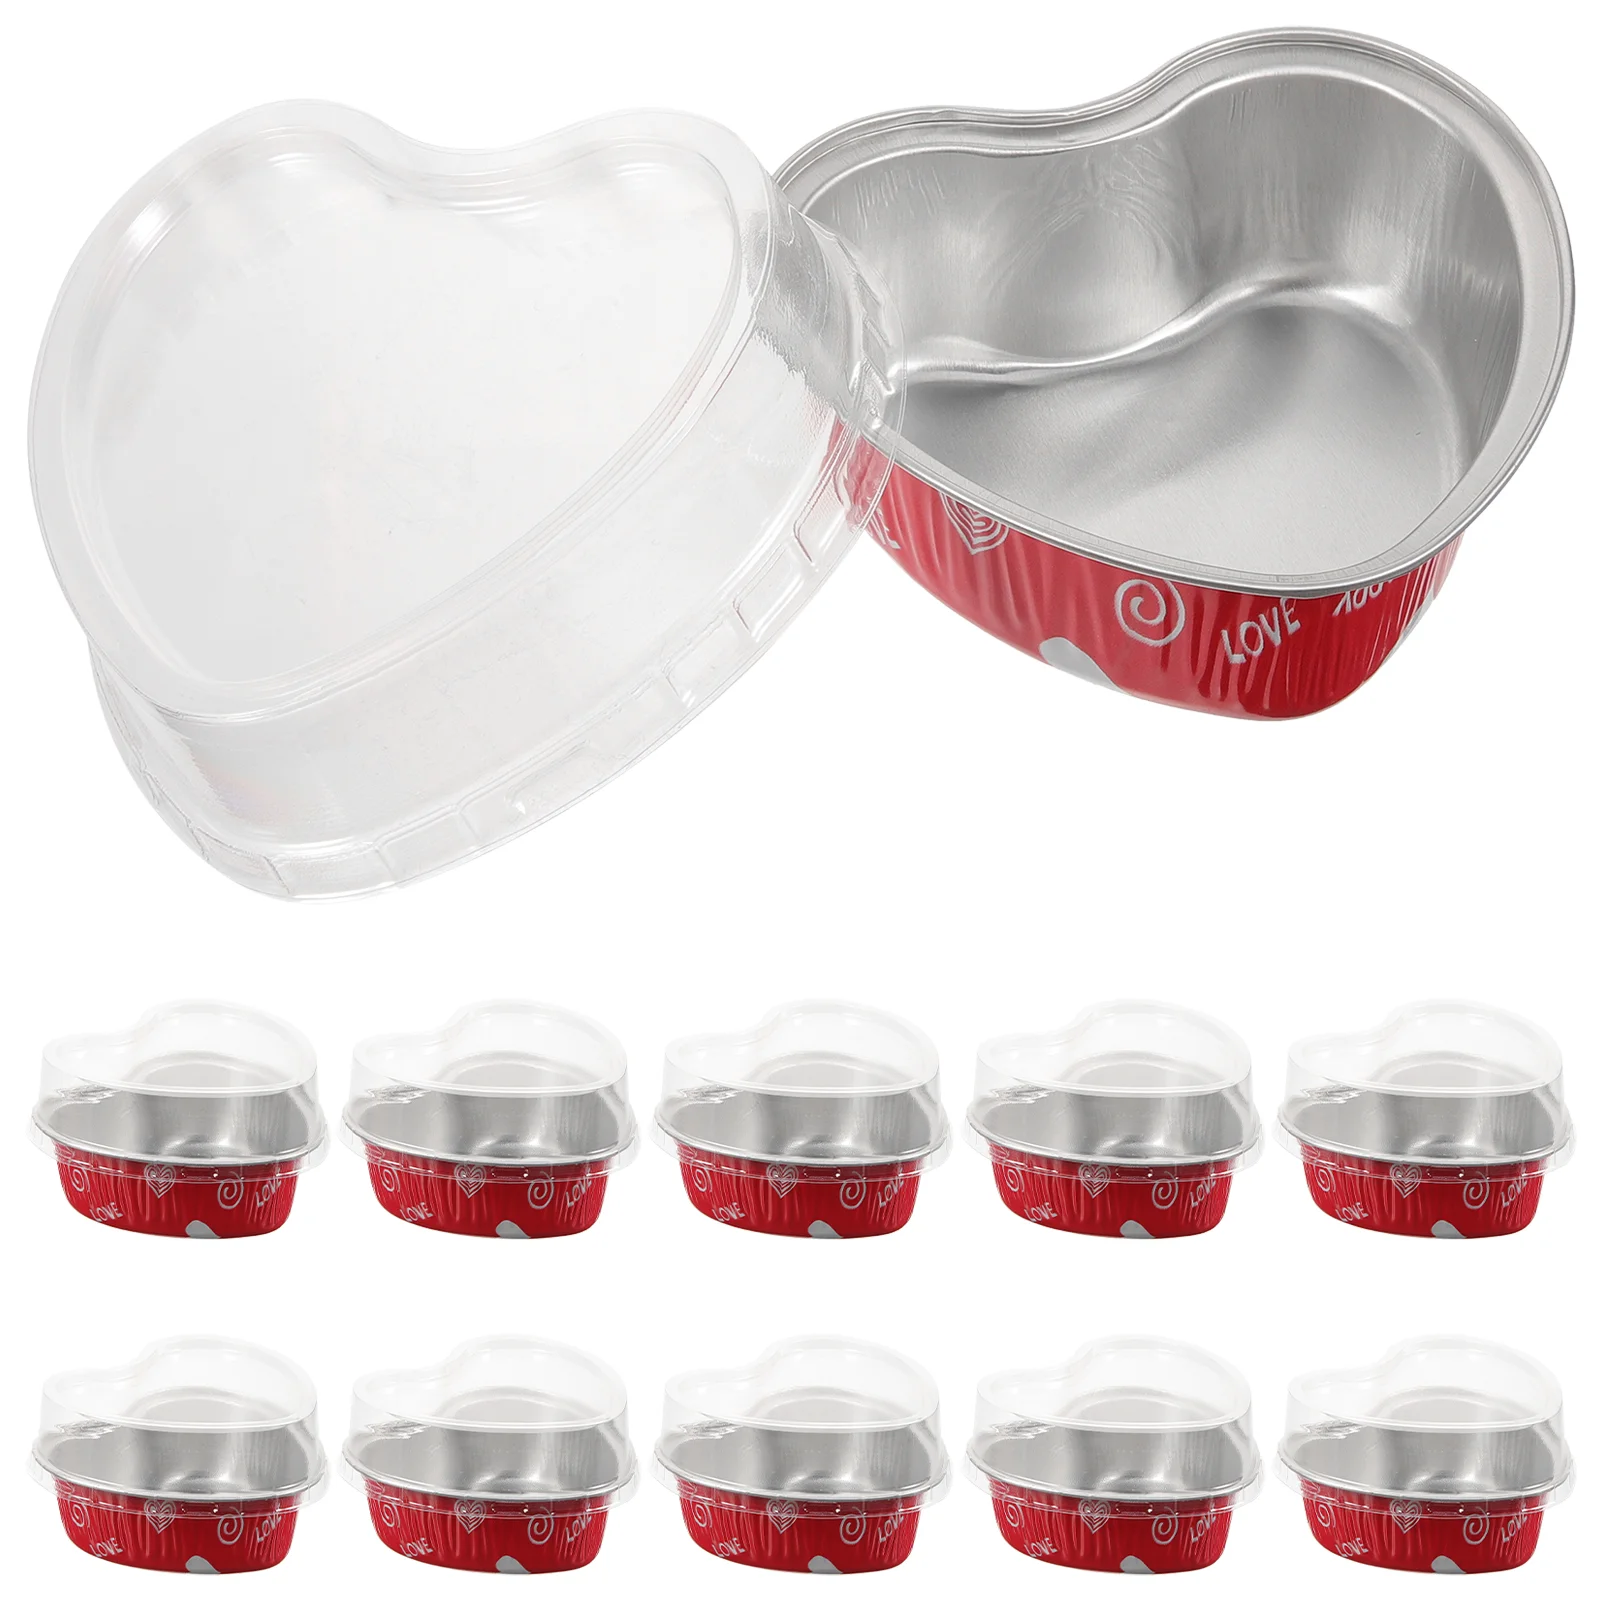 

20Pcs Muffin Cups Cupcake Baking Containers Aluminum Foil Cake Cups Pudding Cups Pans with Lids